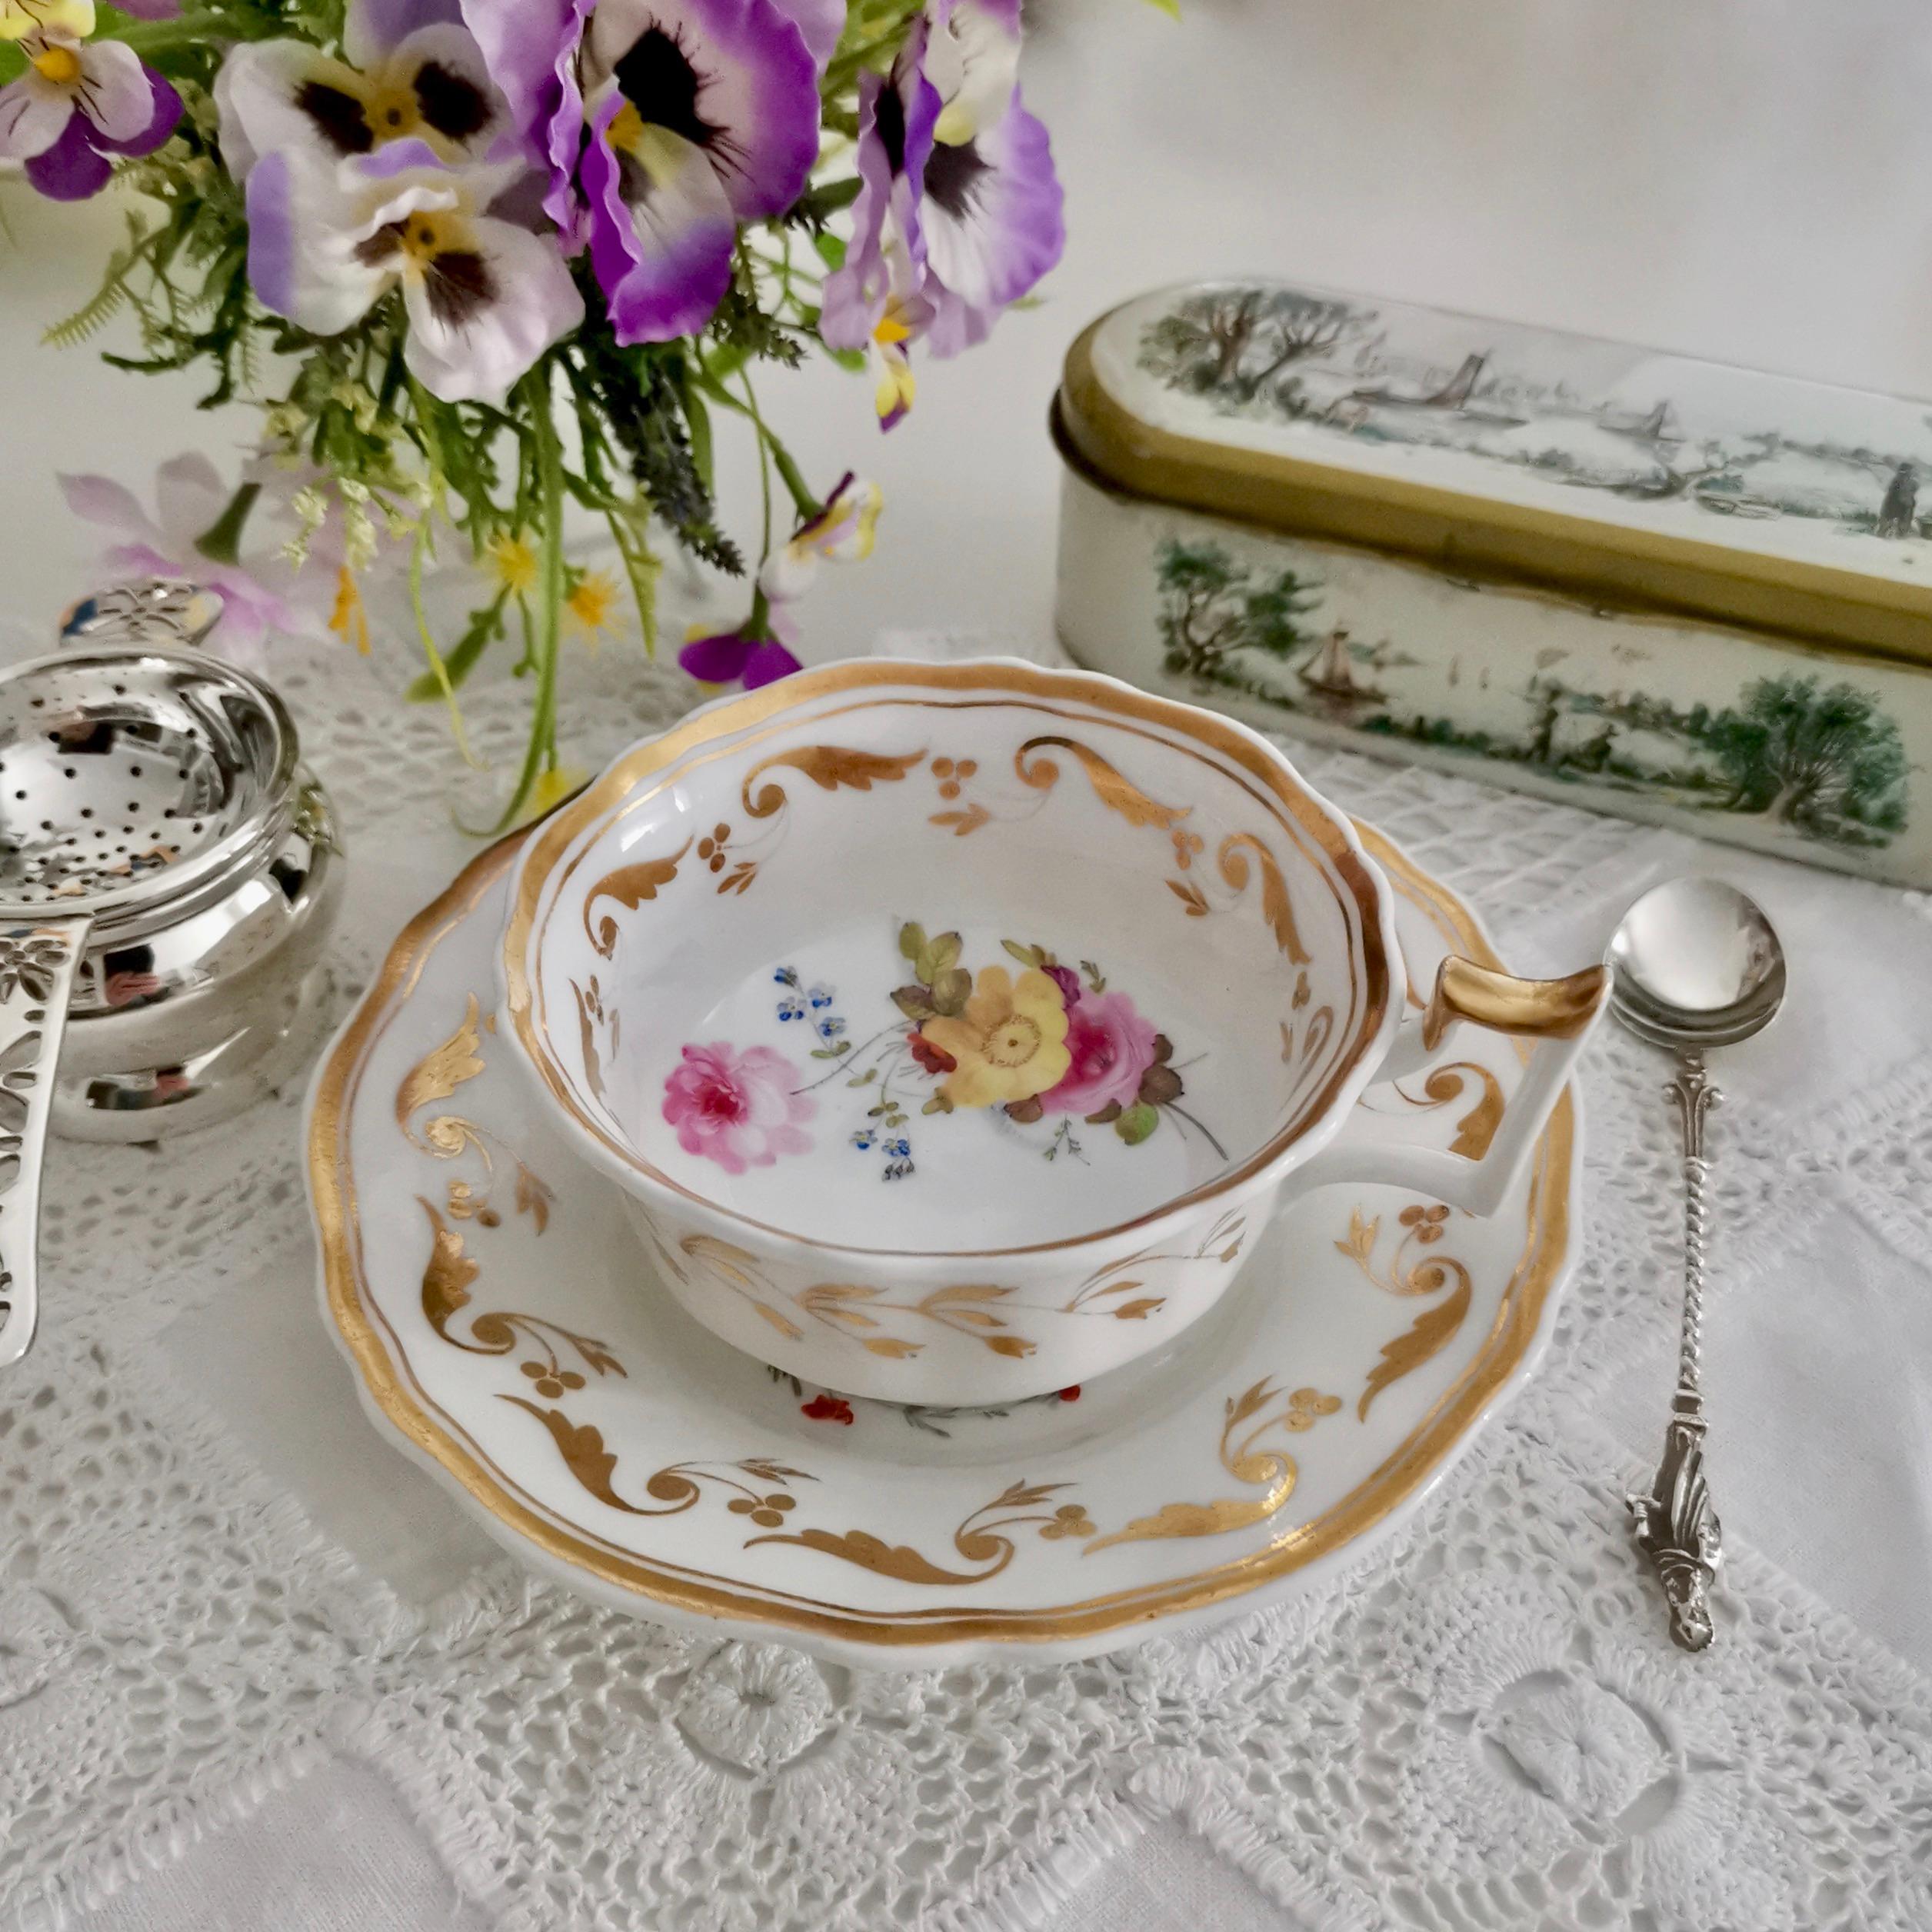 This is beautiful teacup and saucer made in circa 1825 by the Yates factory. The set is in the 